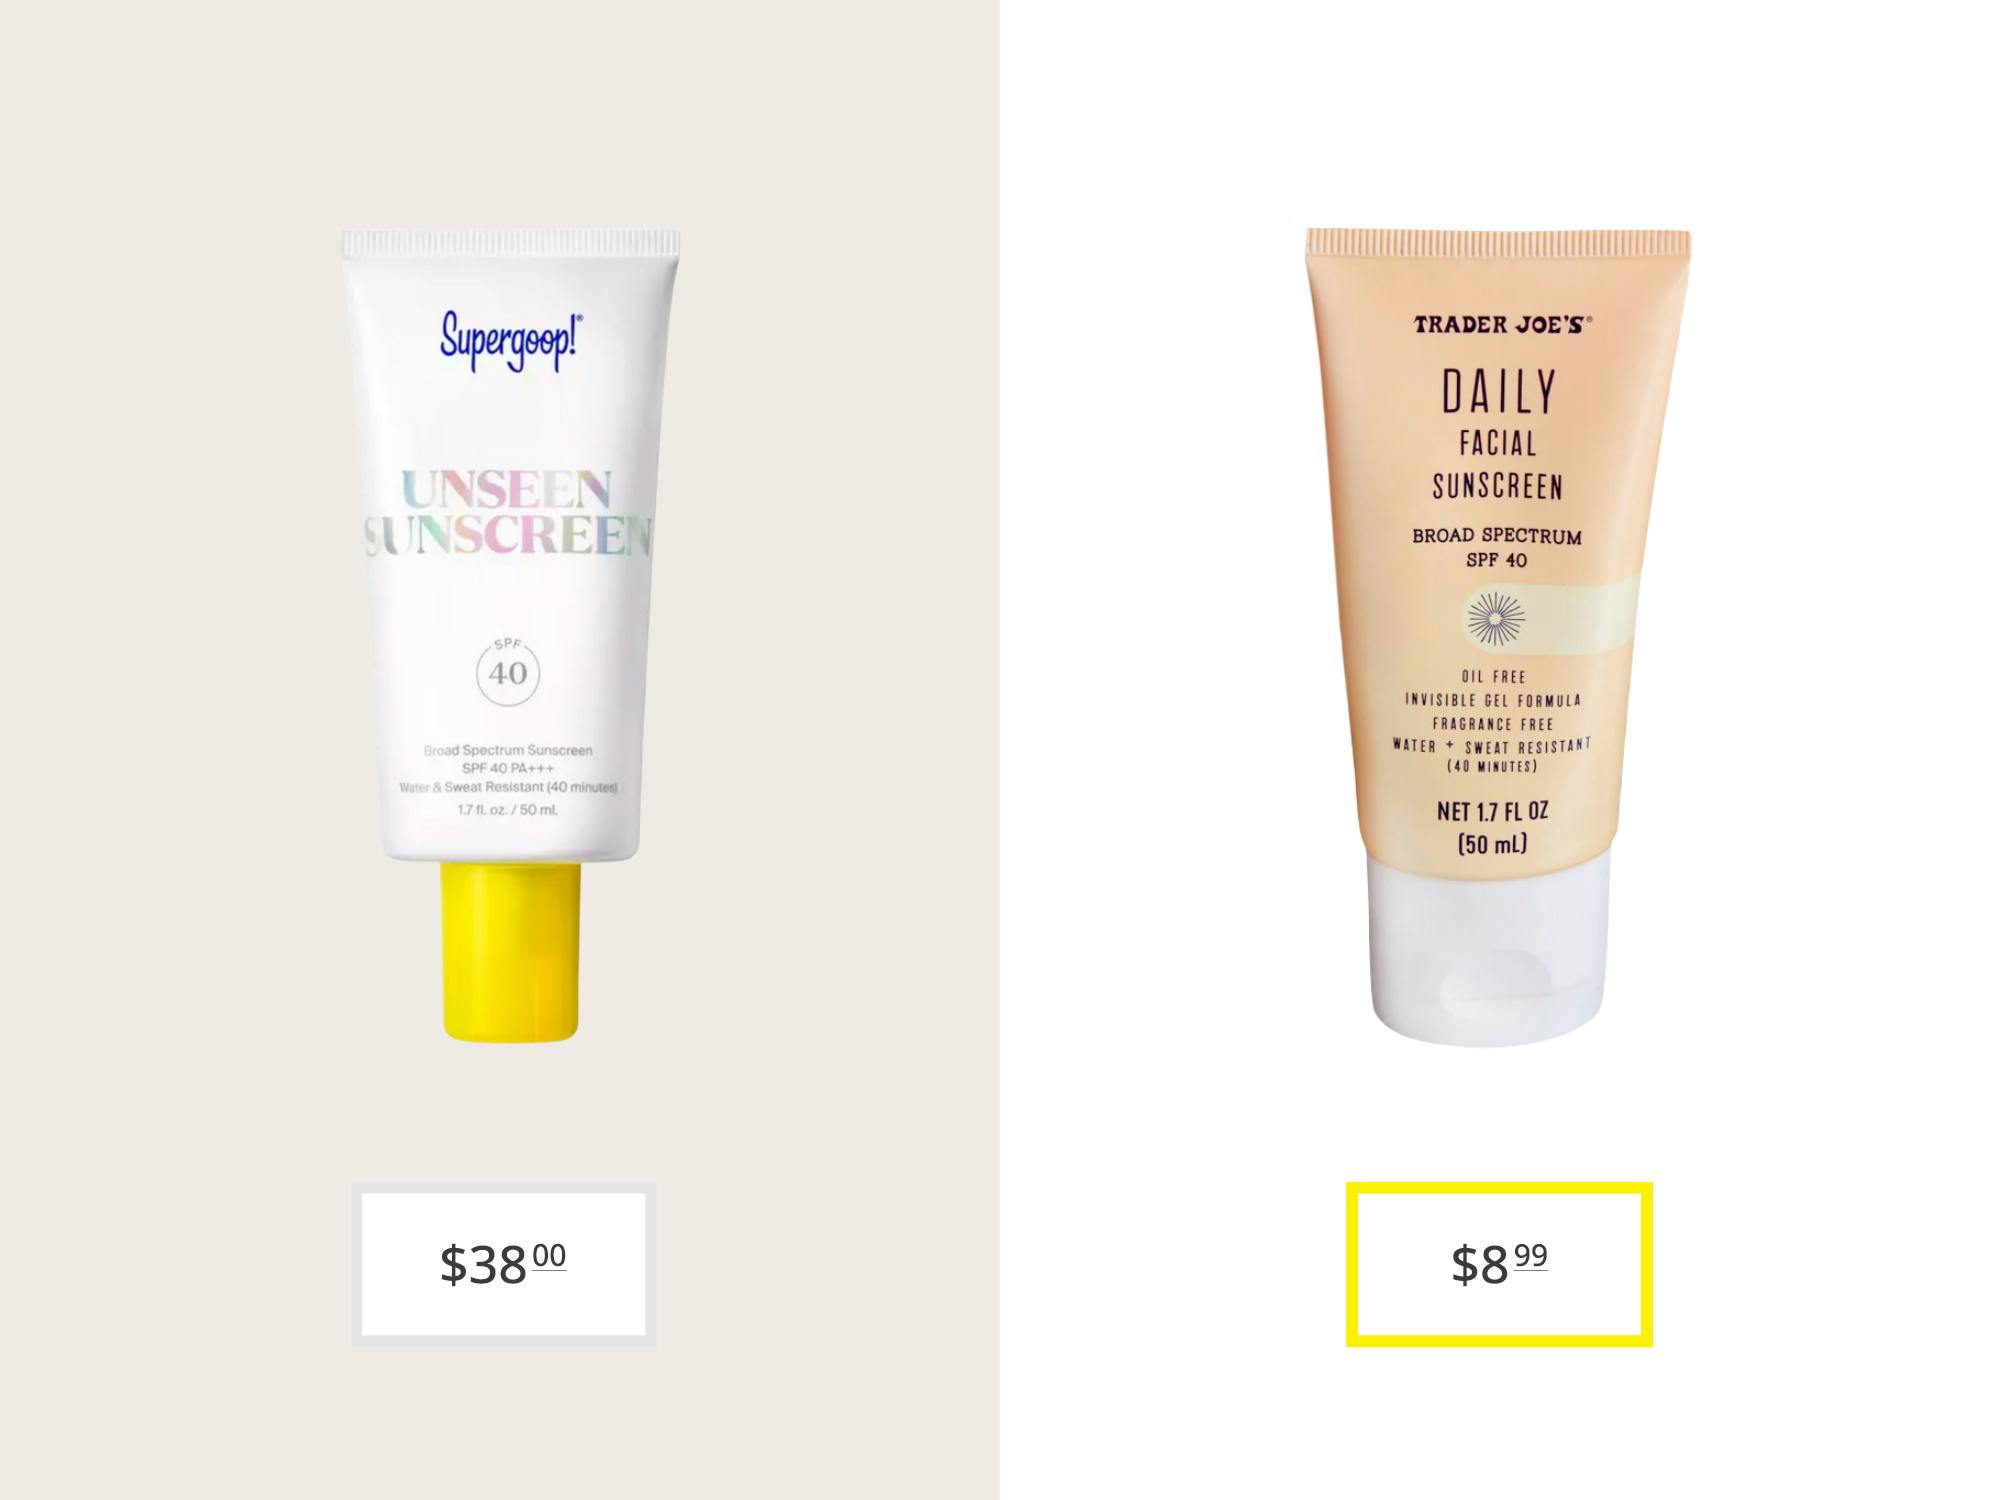 supergoop unseen sunscreen and trader joes daily facial sunscreen price comparison graphic